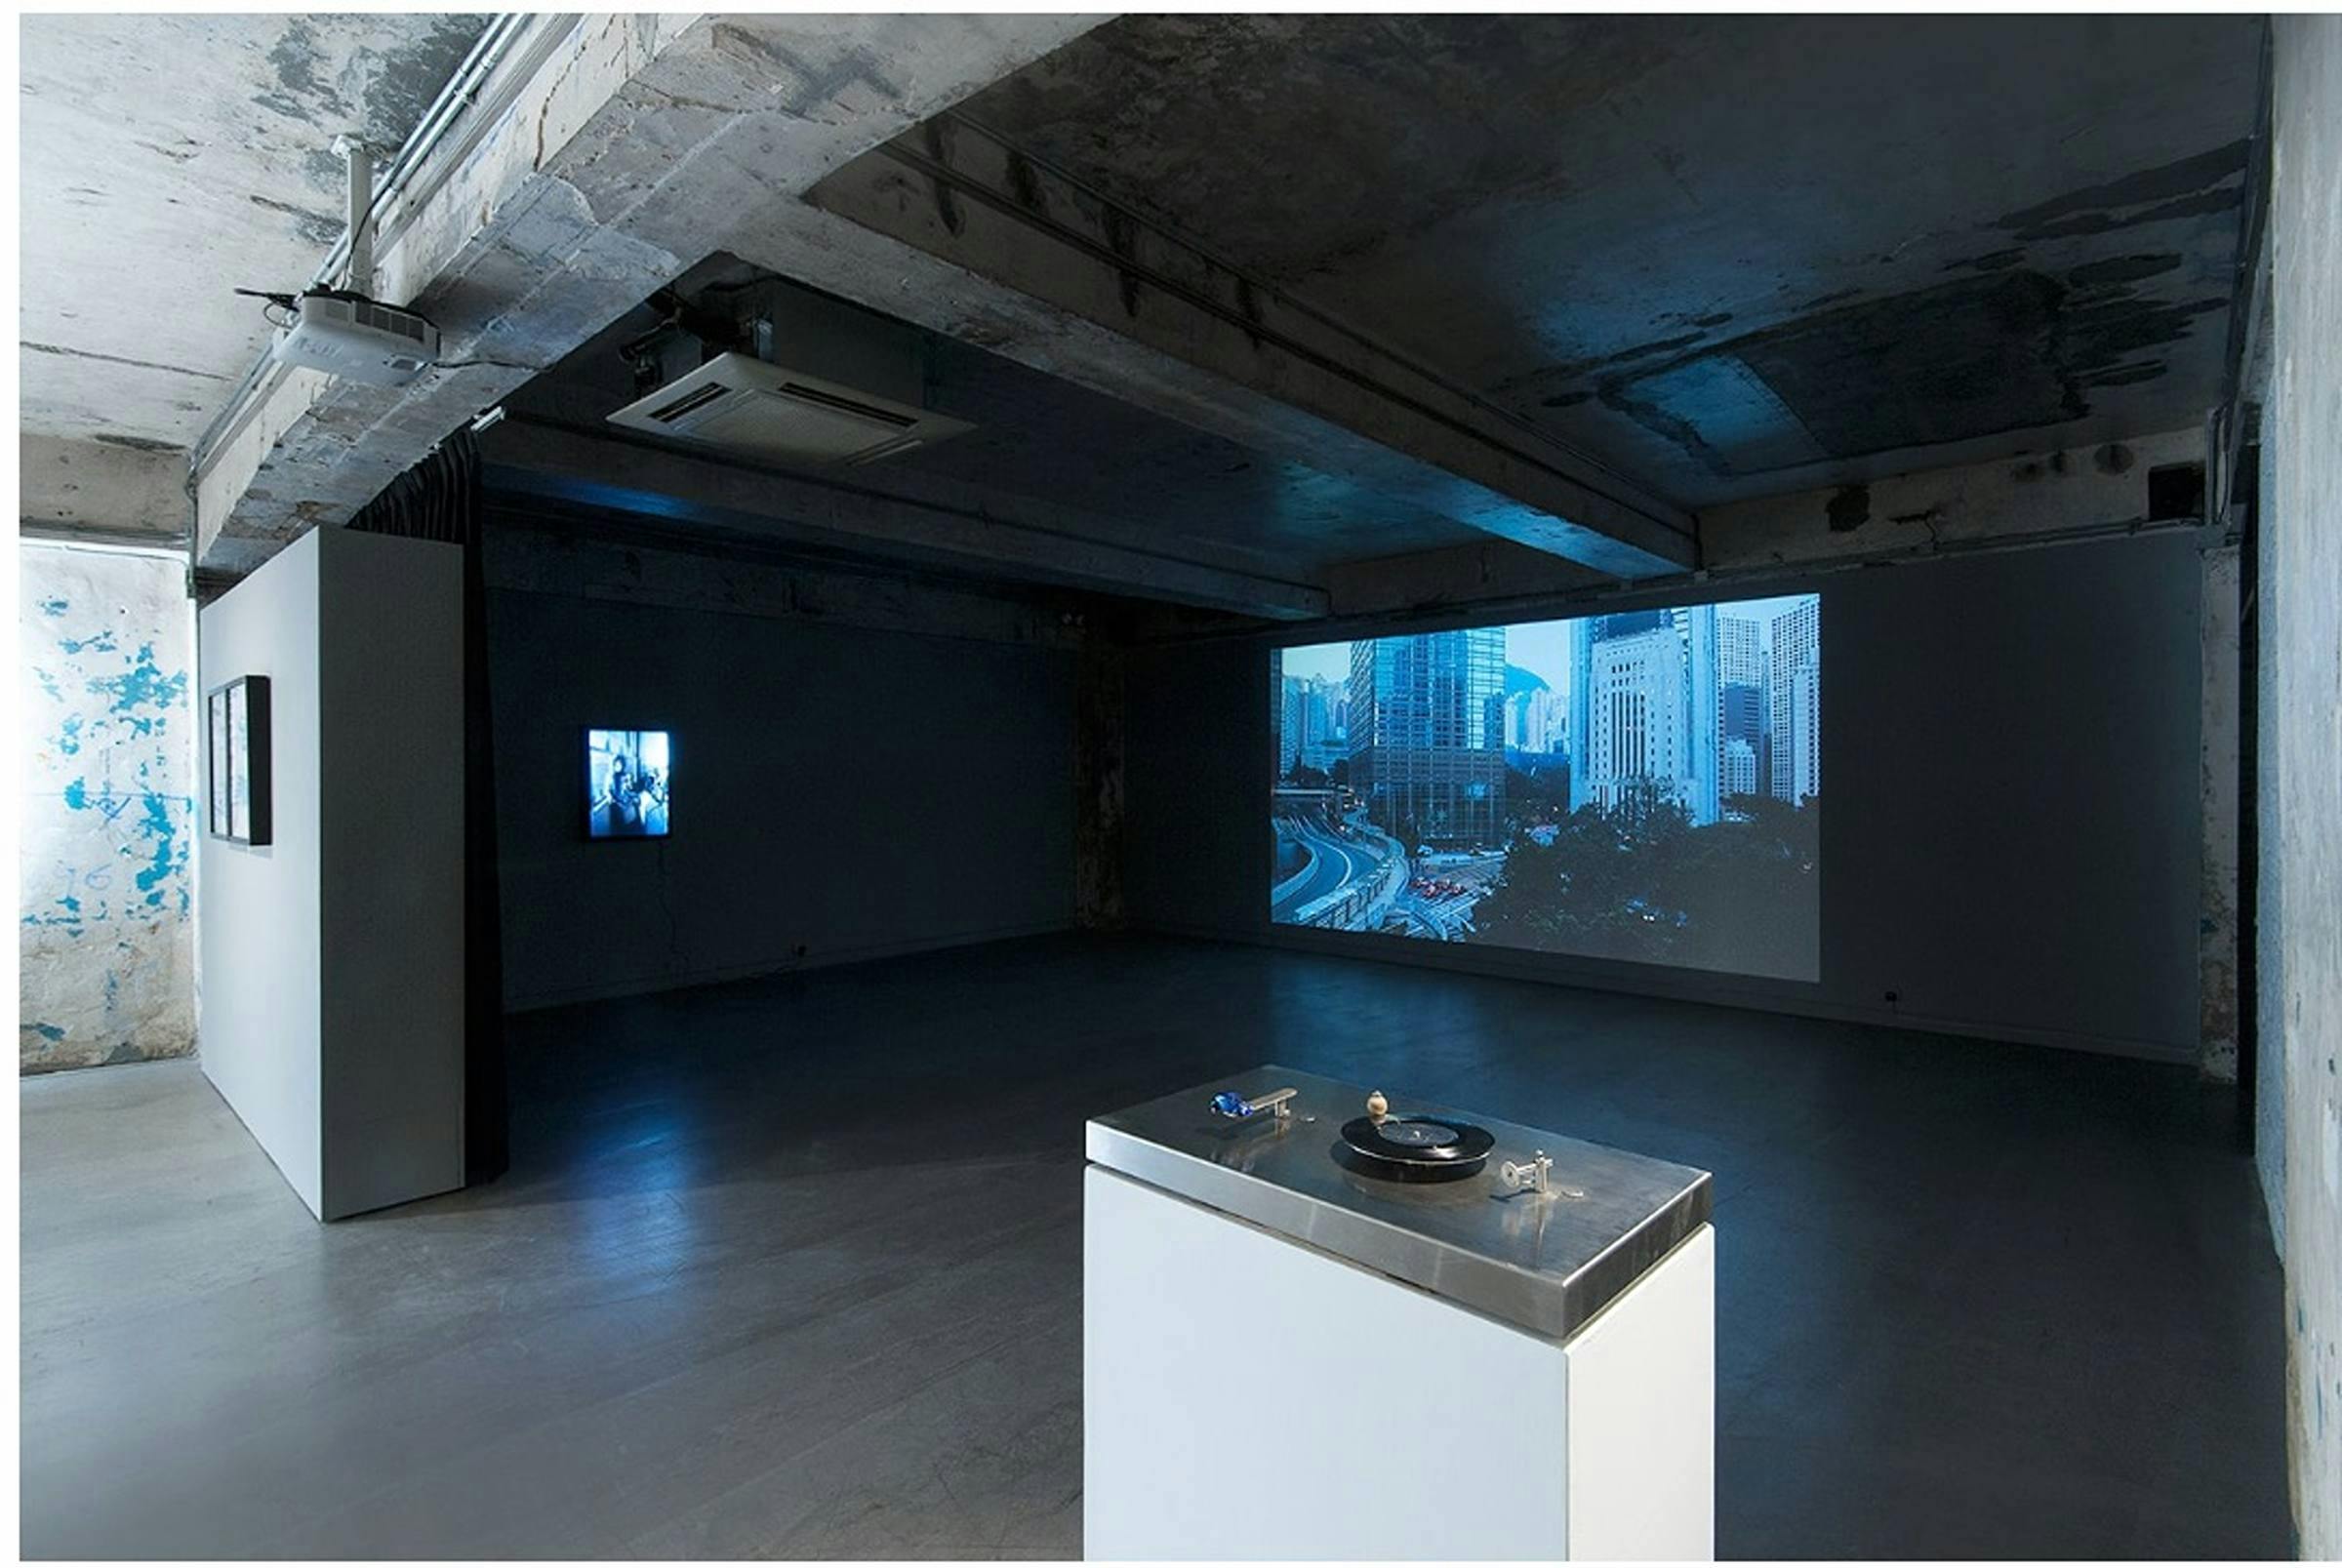 Gallery image of two images being projected onto the walls and a plinth in the foreground.